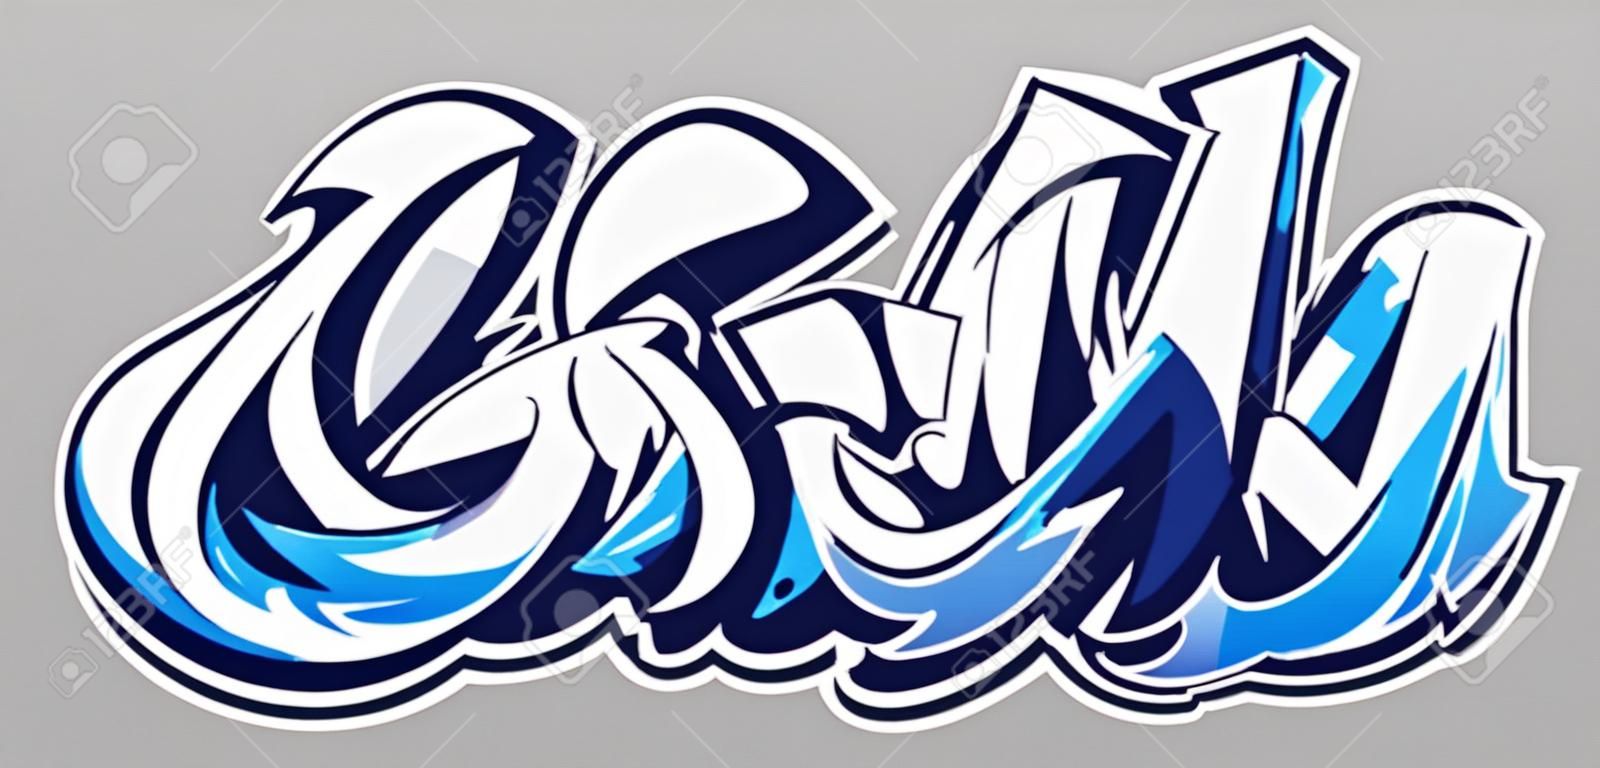 Big Up blue color vector lettering on grey background. Dynamic wild style graffiti art. Three dimensional letters abstract illustration.